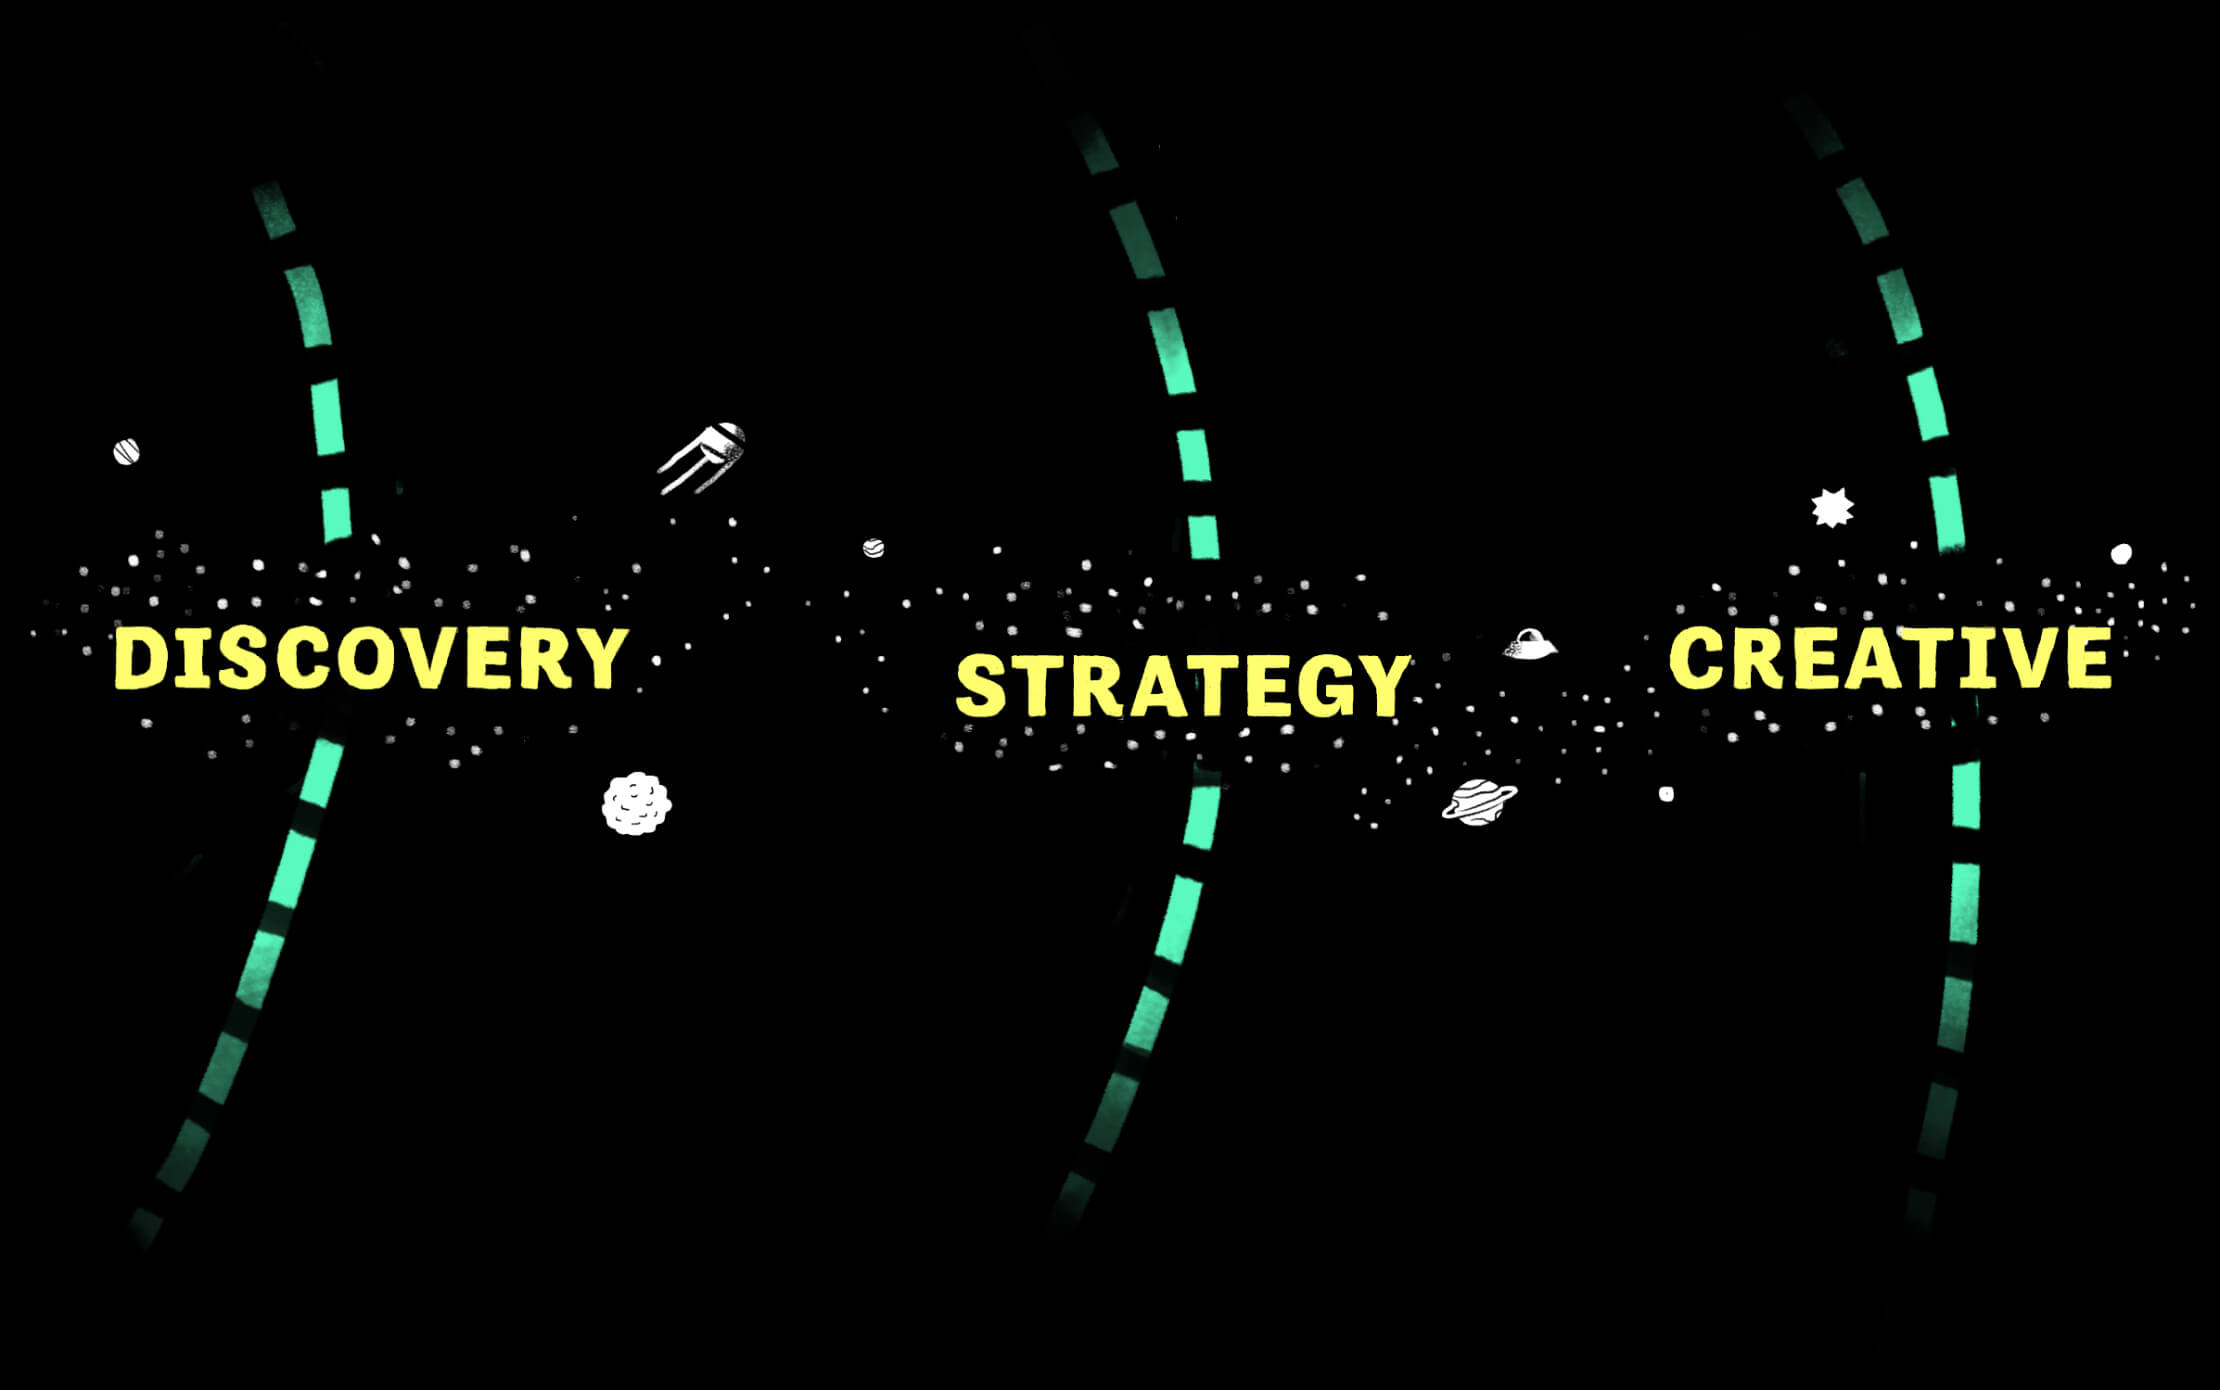 Discovery Strategy and Creative